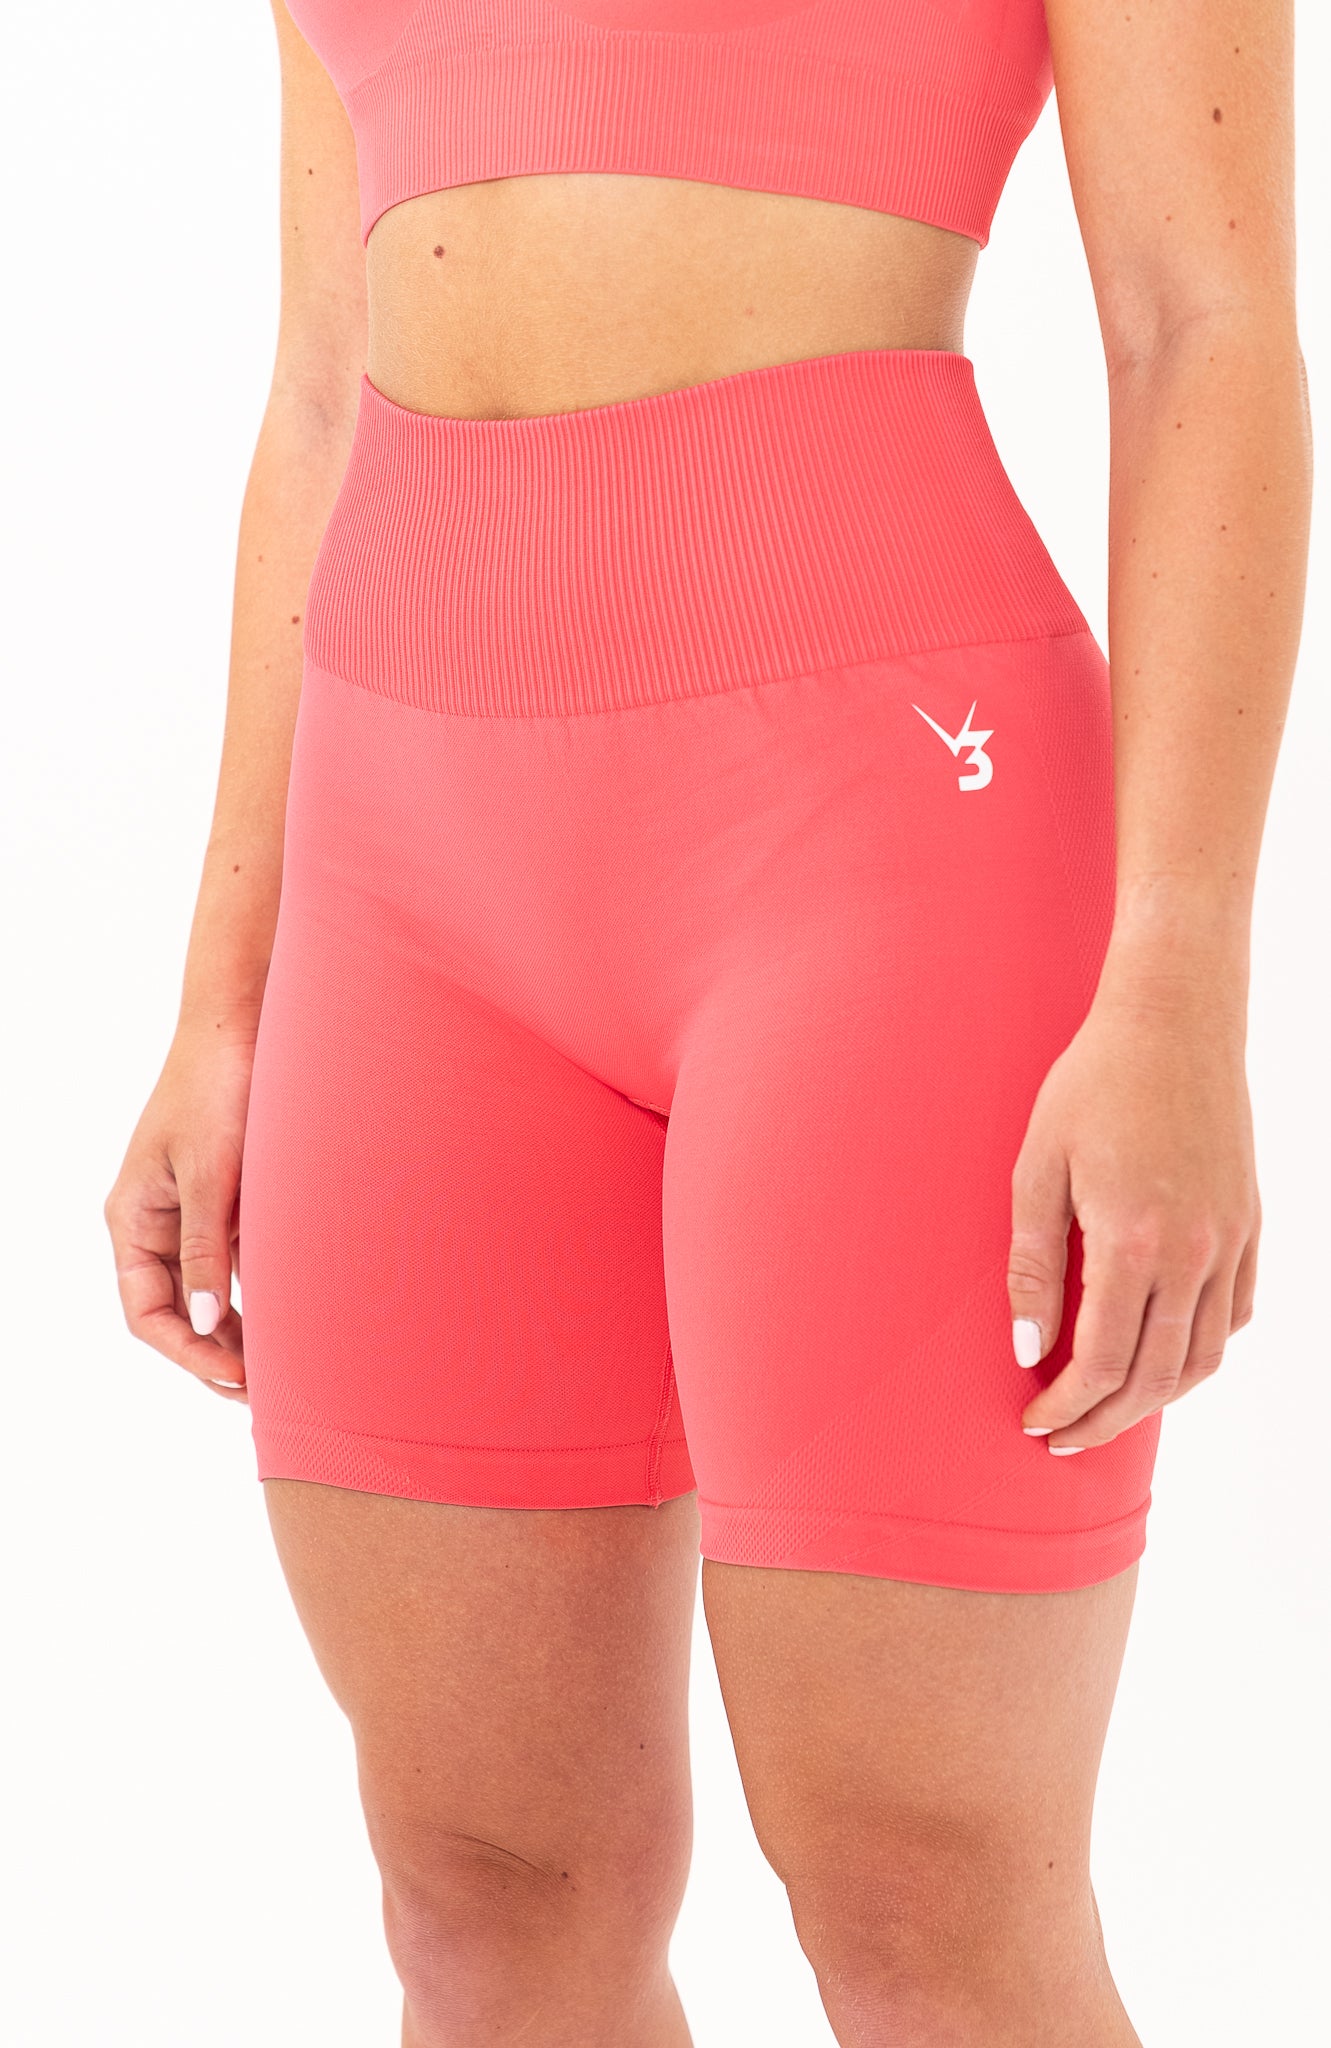 V3 Apparel Women's seamless Limitless high waisted cycle shorts in coral pink – Squat proof 5 inch inseam leg bum enhancing shorts for Gym workouts training, Running, yoga, bodybuilding and bikini fitness.